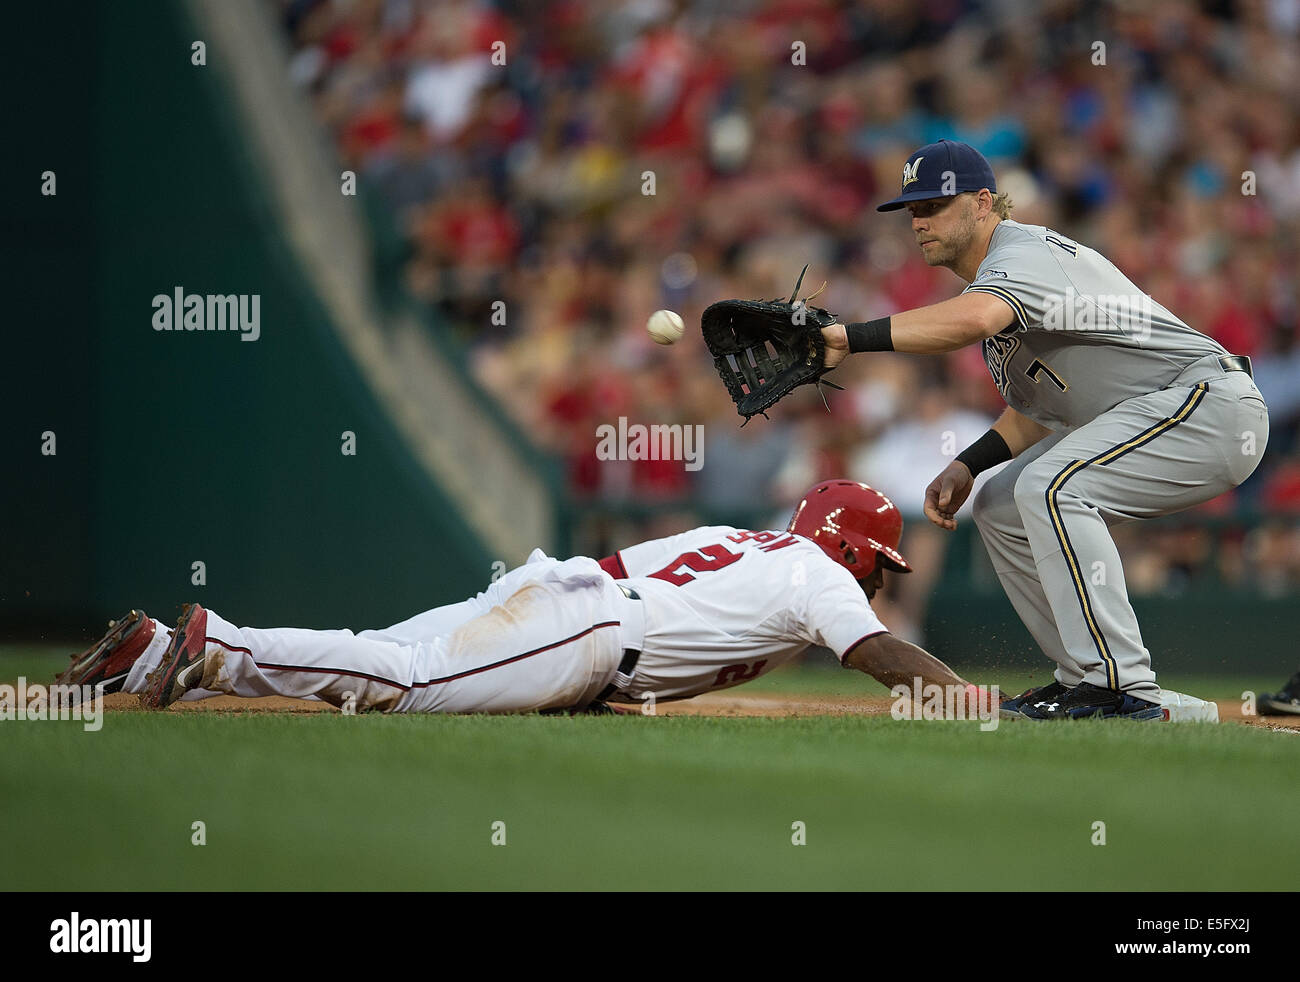 Washington Nationals center fielder Denard Span (2) dives safely back to first base on a pickoff attempt throw to Milwaukee Brewers first baseman Mark Reynolds (7) during the third inning of their game at Nationals Park in Washington, D.C, Friday, July 18, 2014.(Photo by Harry E. Walker) Stock Photo